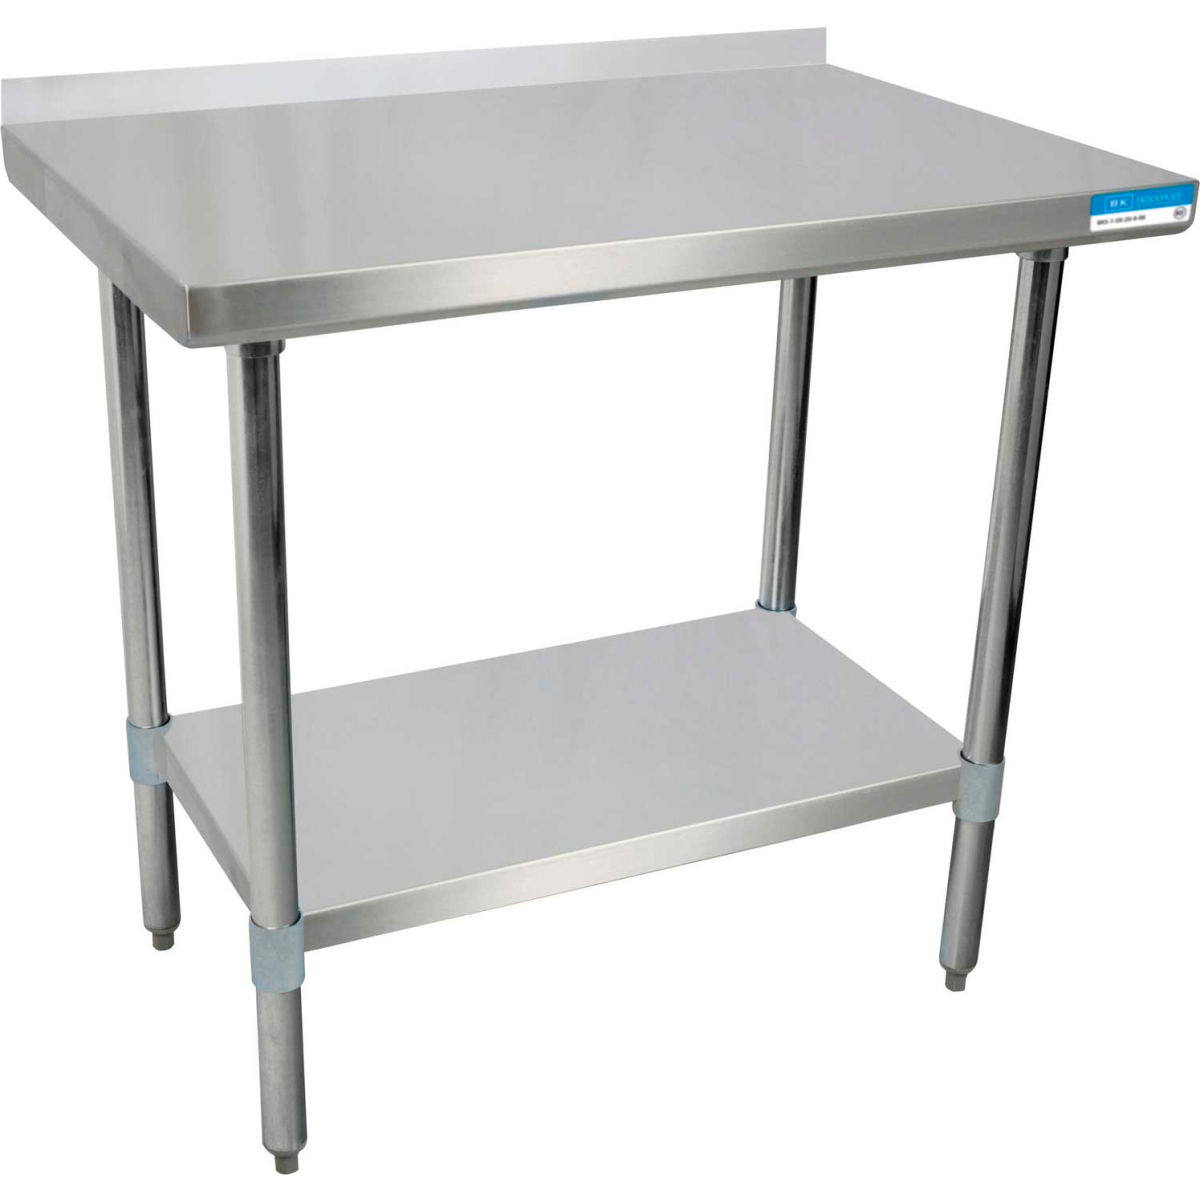 Picture of BK Resources B1516244 18 Gauge 430 Series Stainless Workbench with Undershelf & 1.5 in. Backsplash - 60 x 18 in.